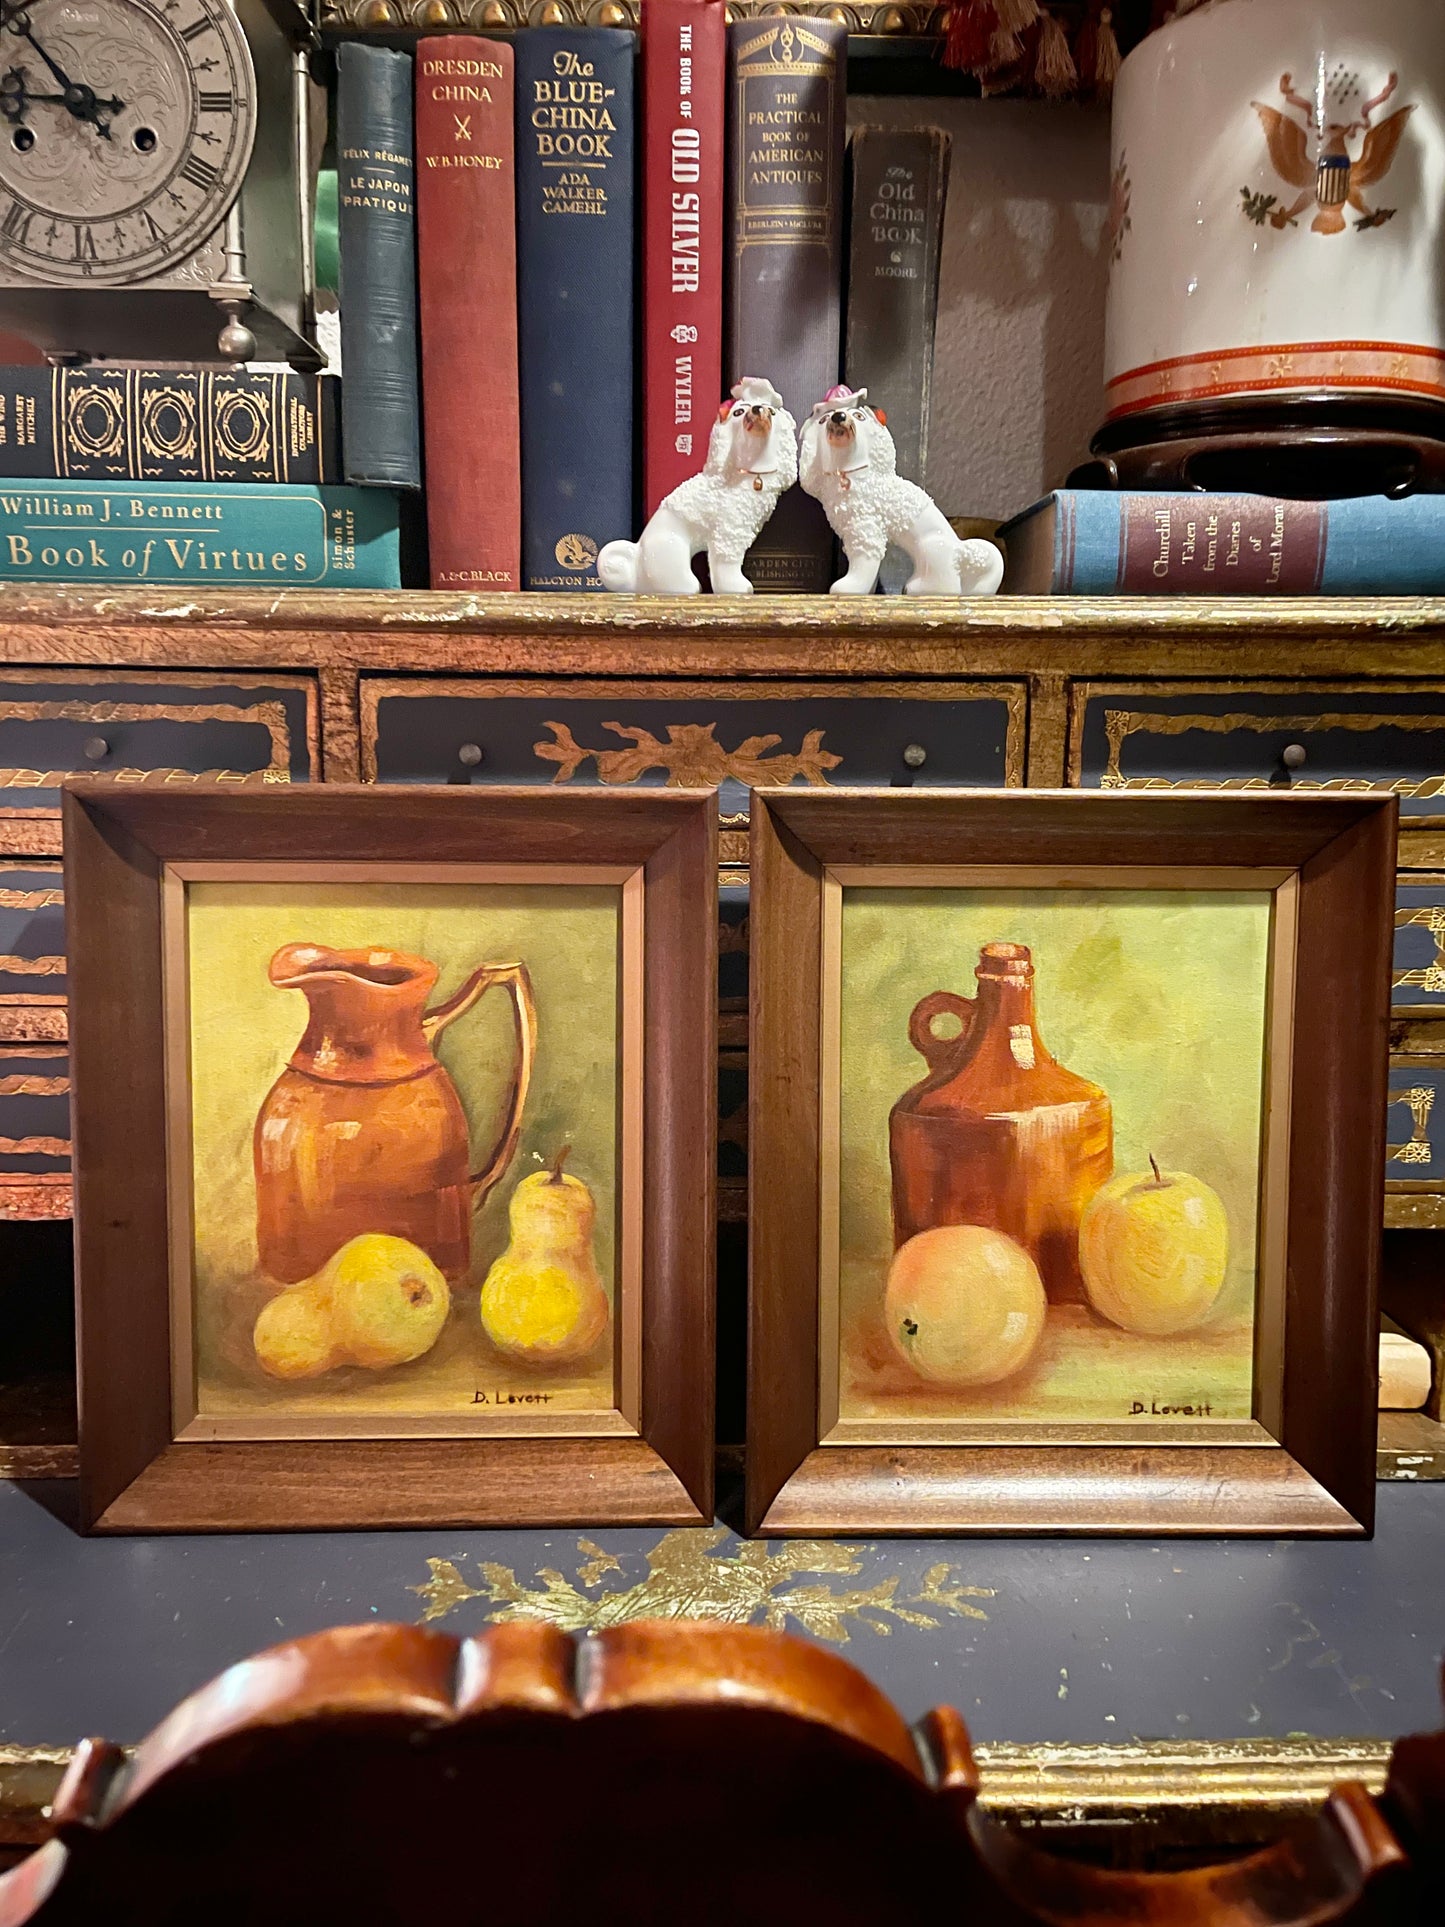 Vintage Pear and Copper Pitcher Still Life Painting